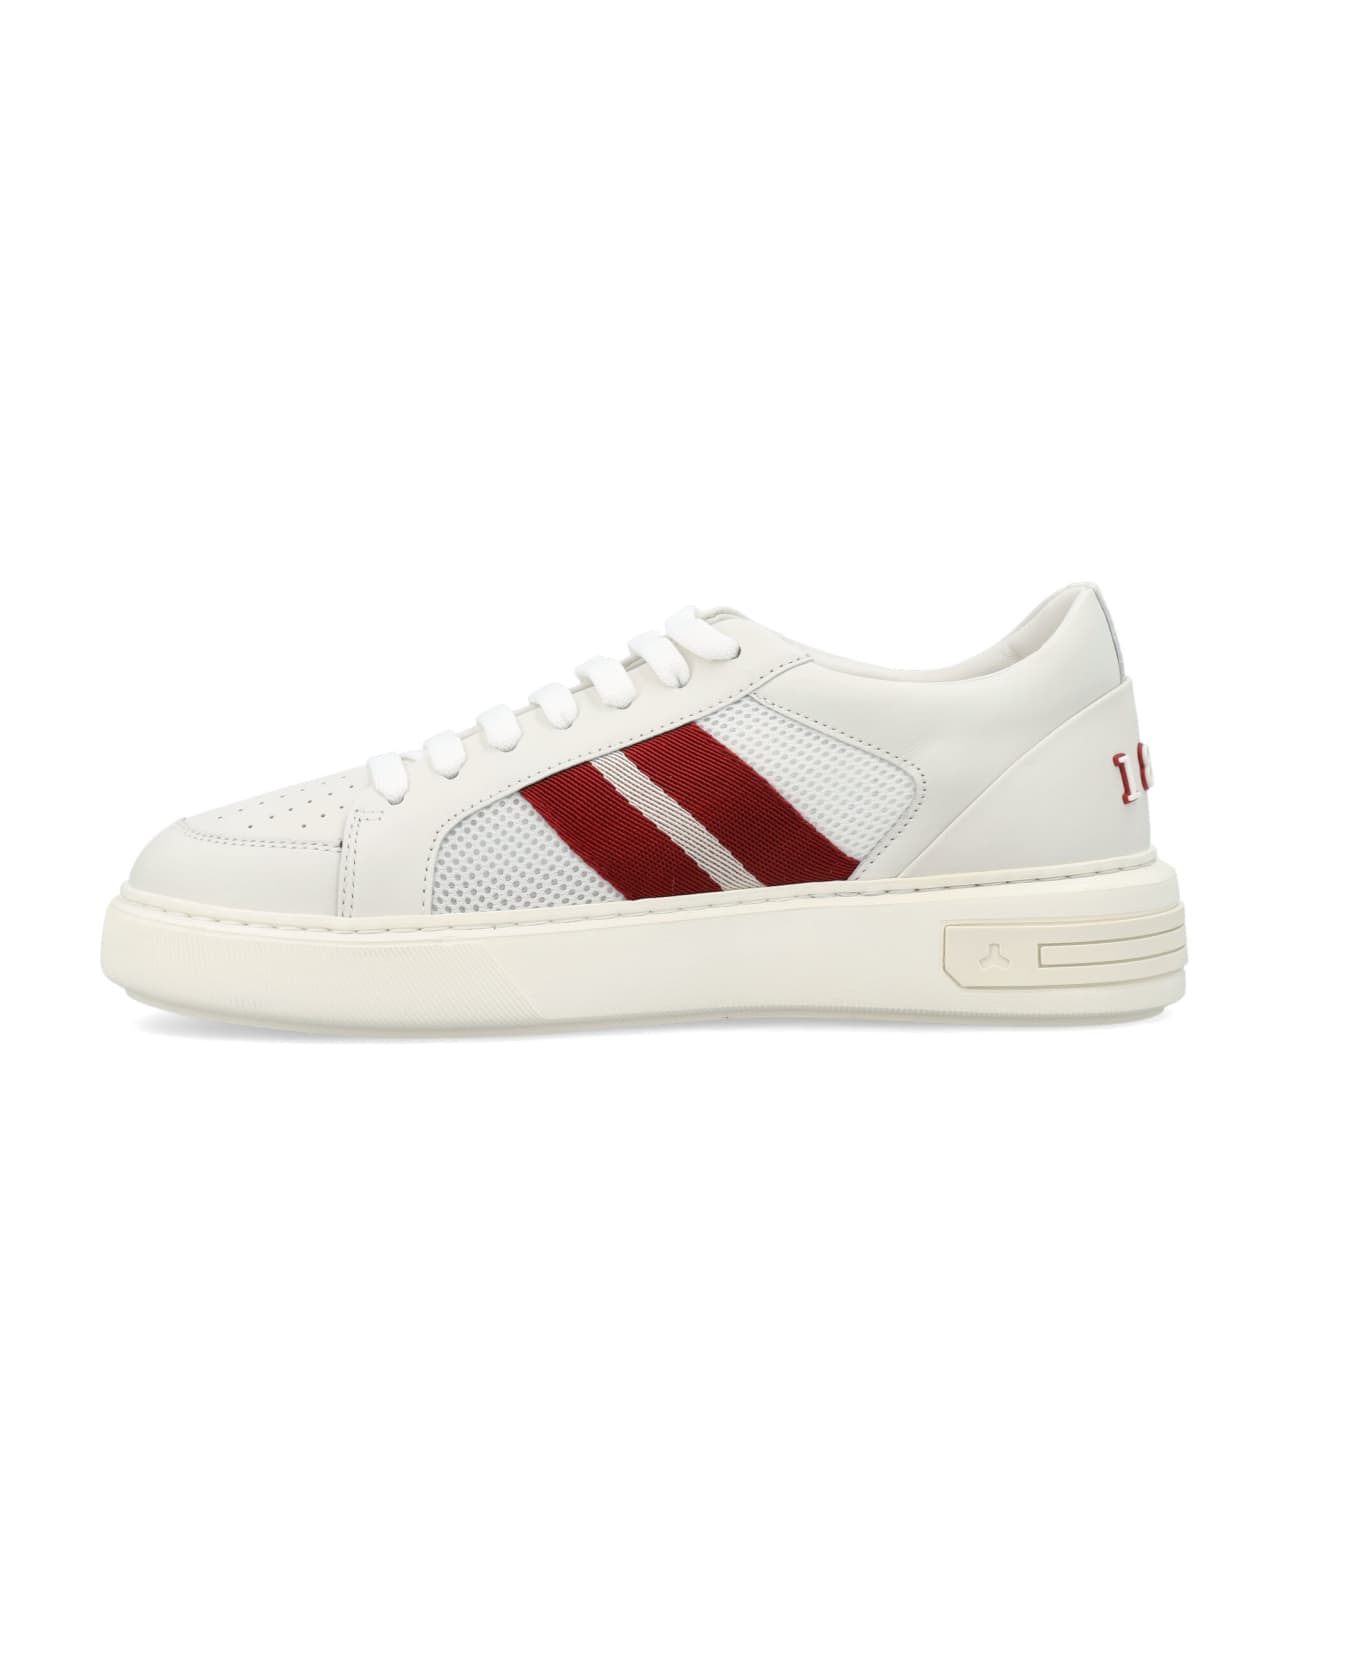 Bally Melys-t Leather Sneakers - 0300 WHITE